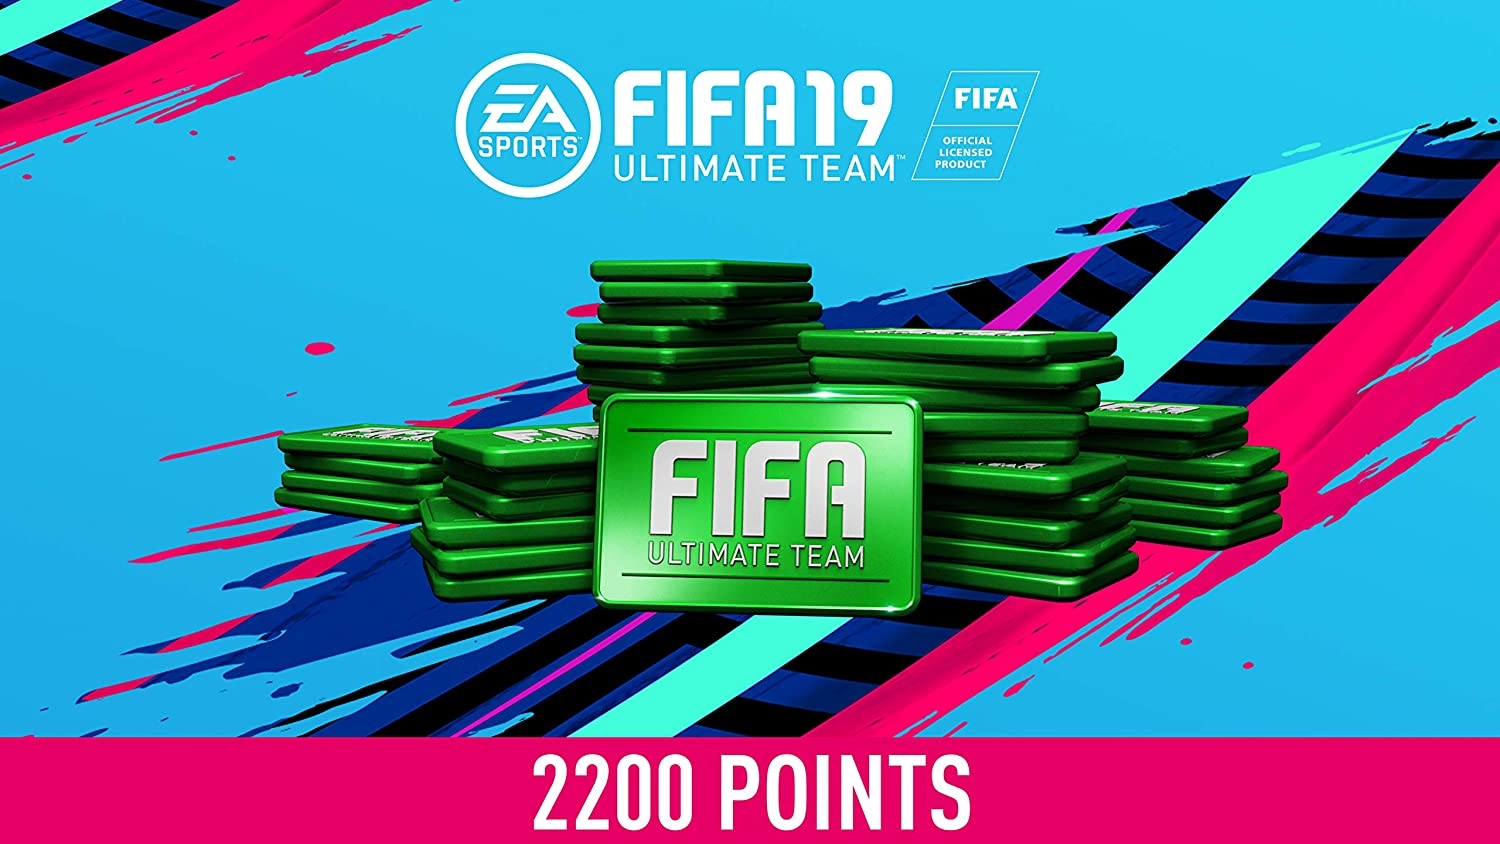 FIFA 23 ULTIMATE TEAM 12000 POINTS, XBOX ONE/XBOX SERIES X, S